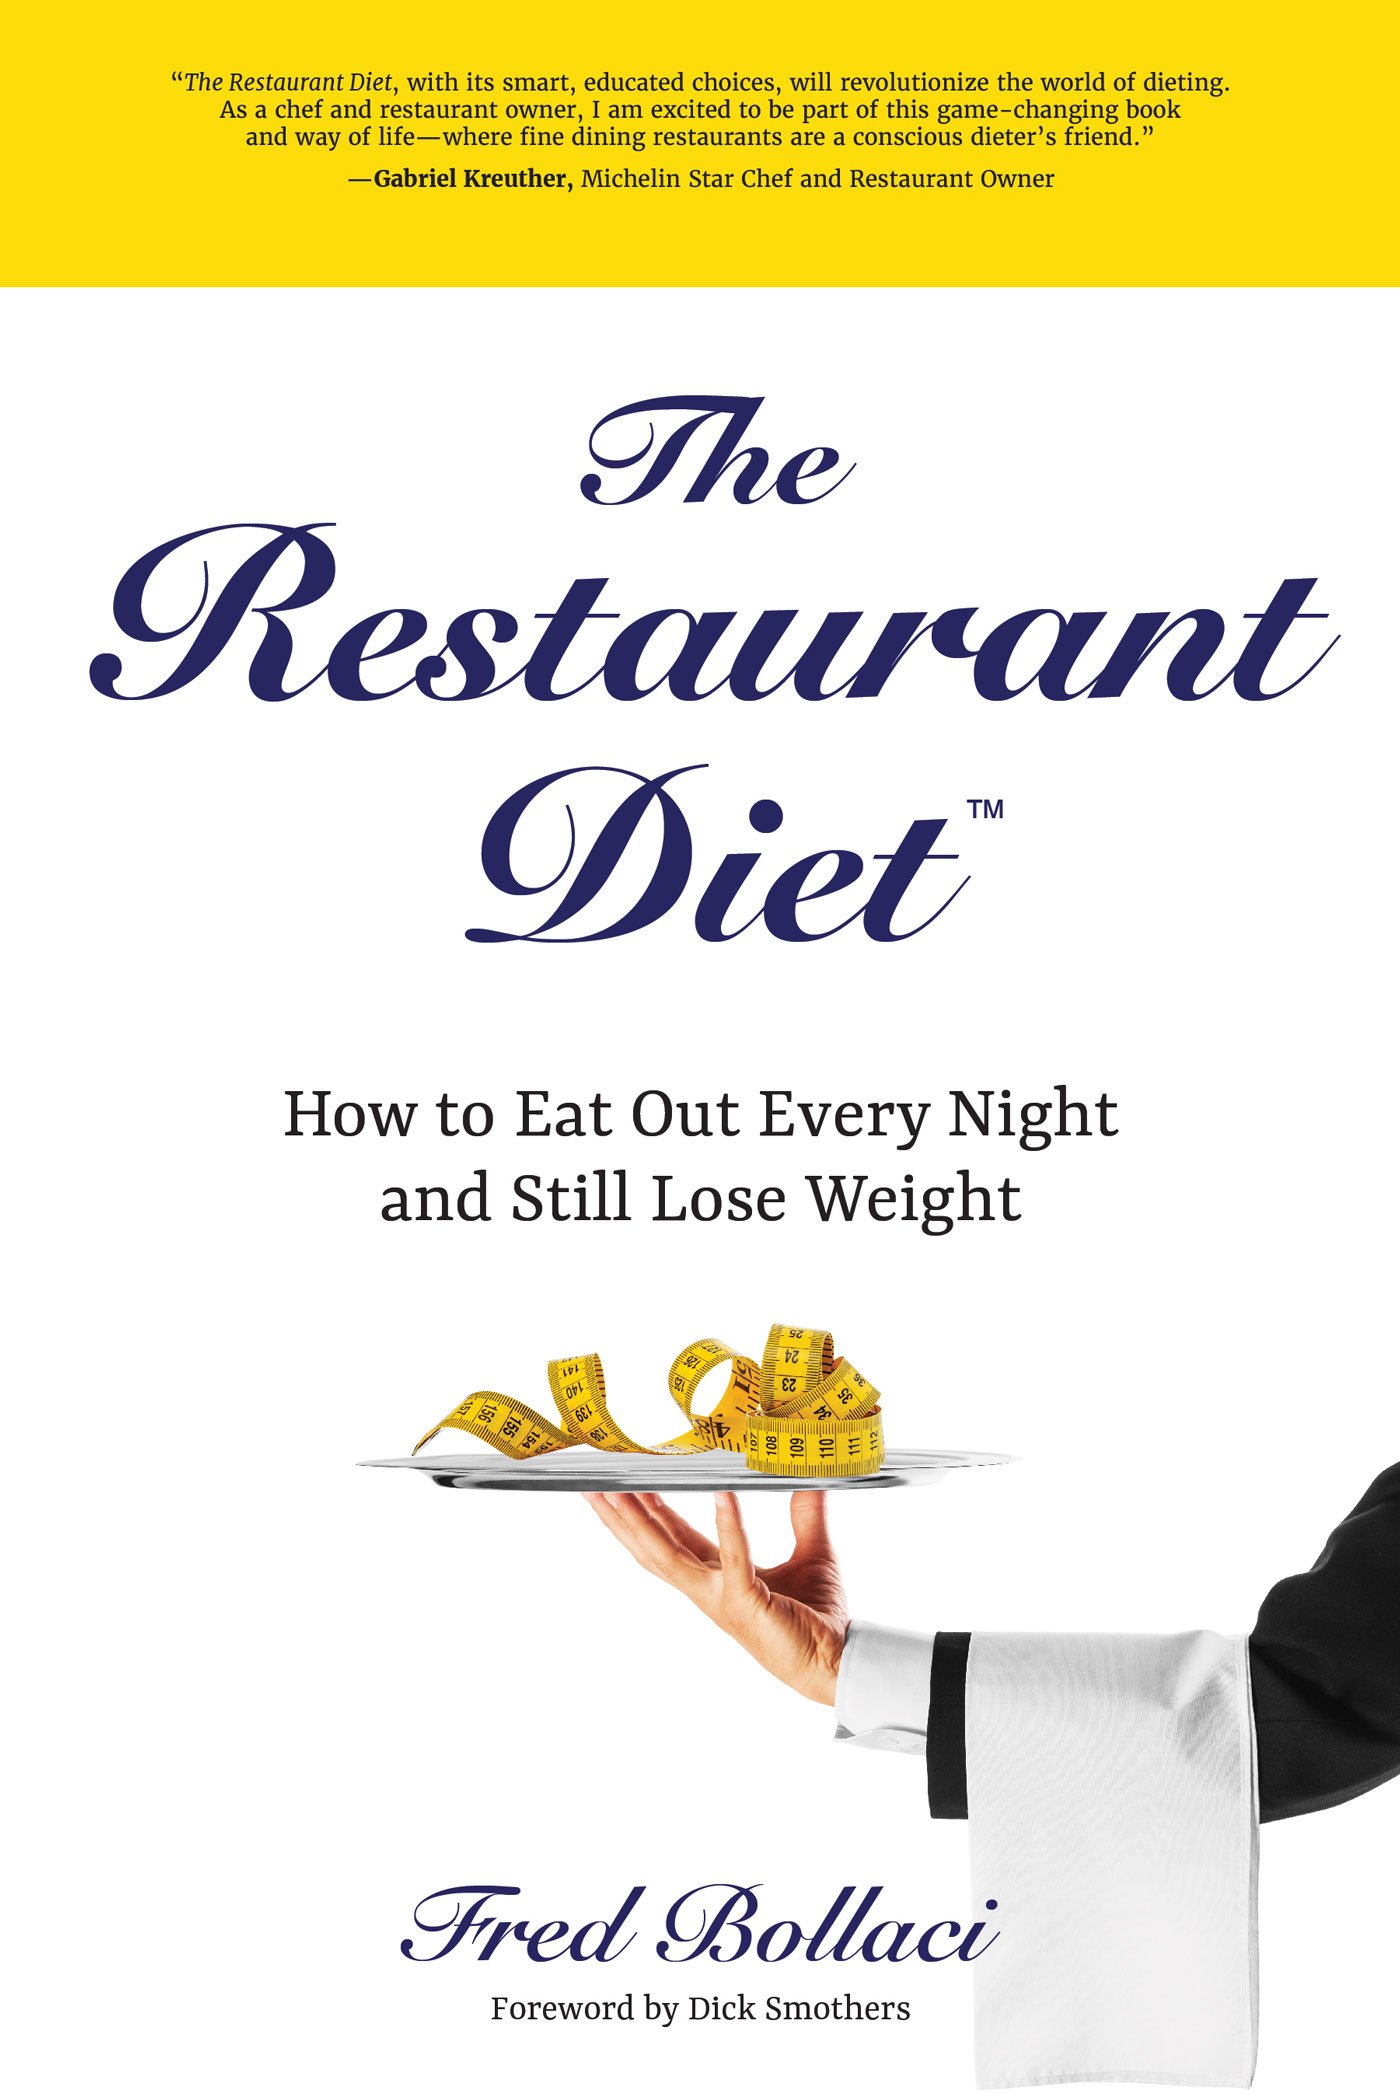 The Restaurant Diet: How to Eat Out Every Night and Still Lose Weigh